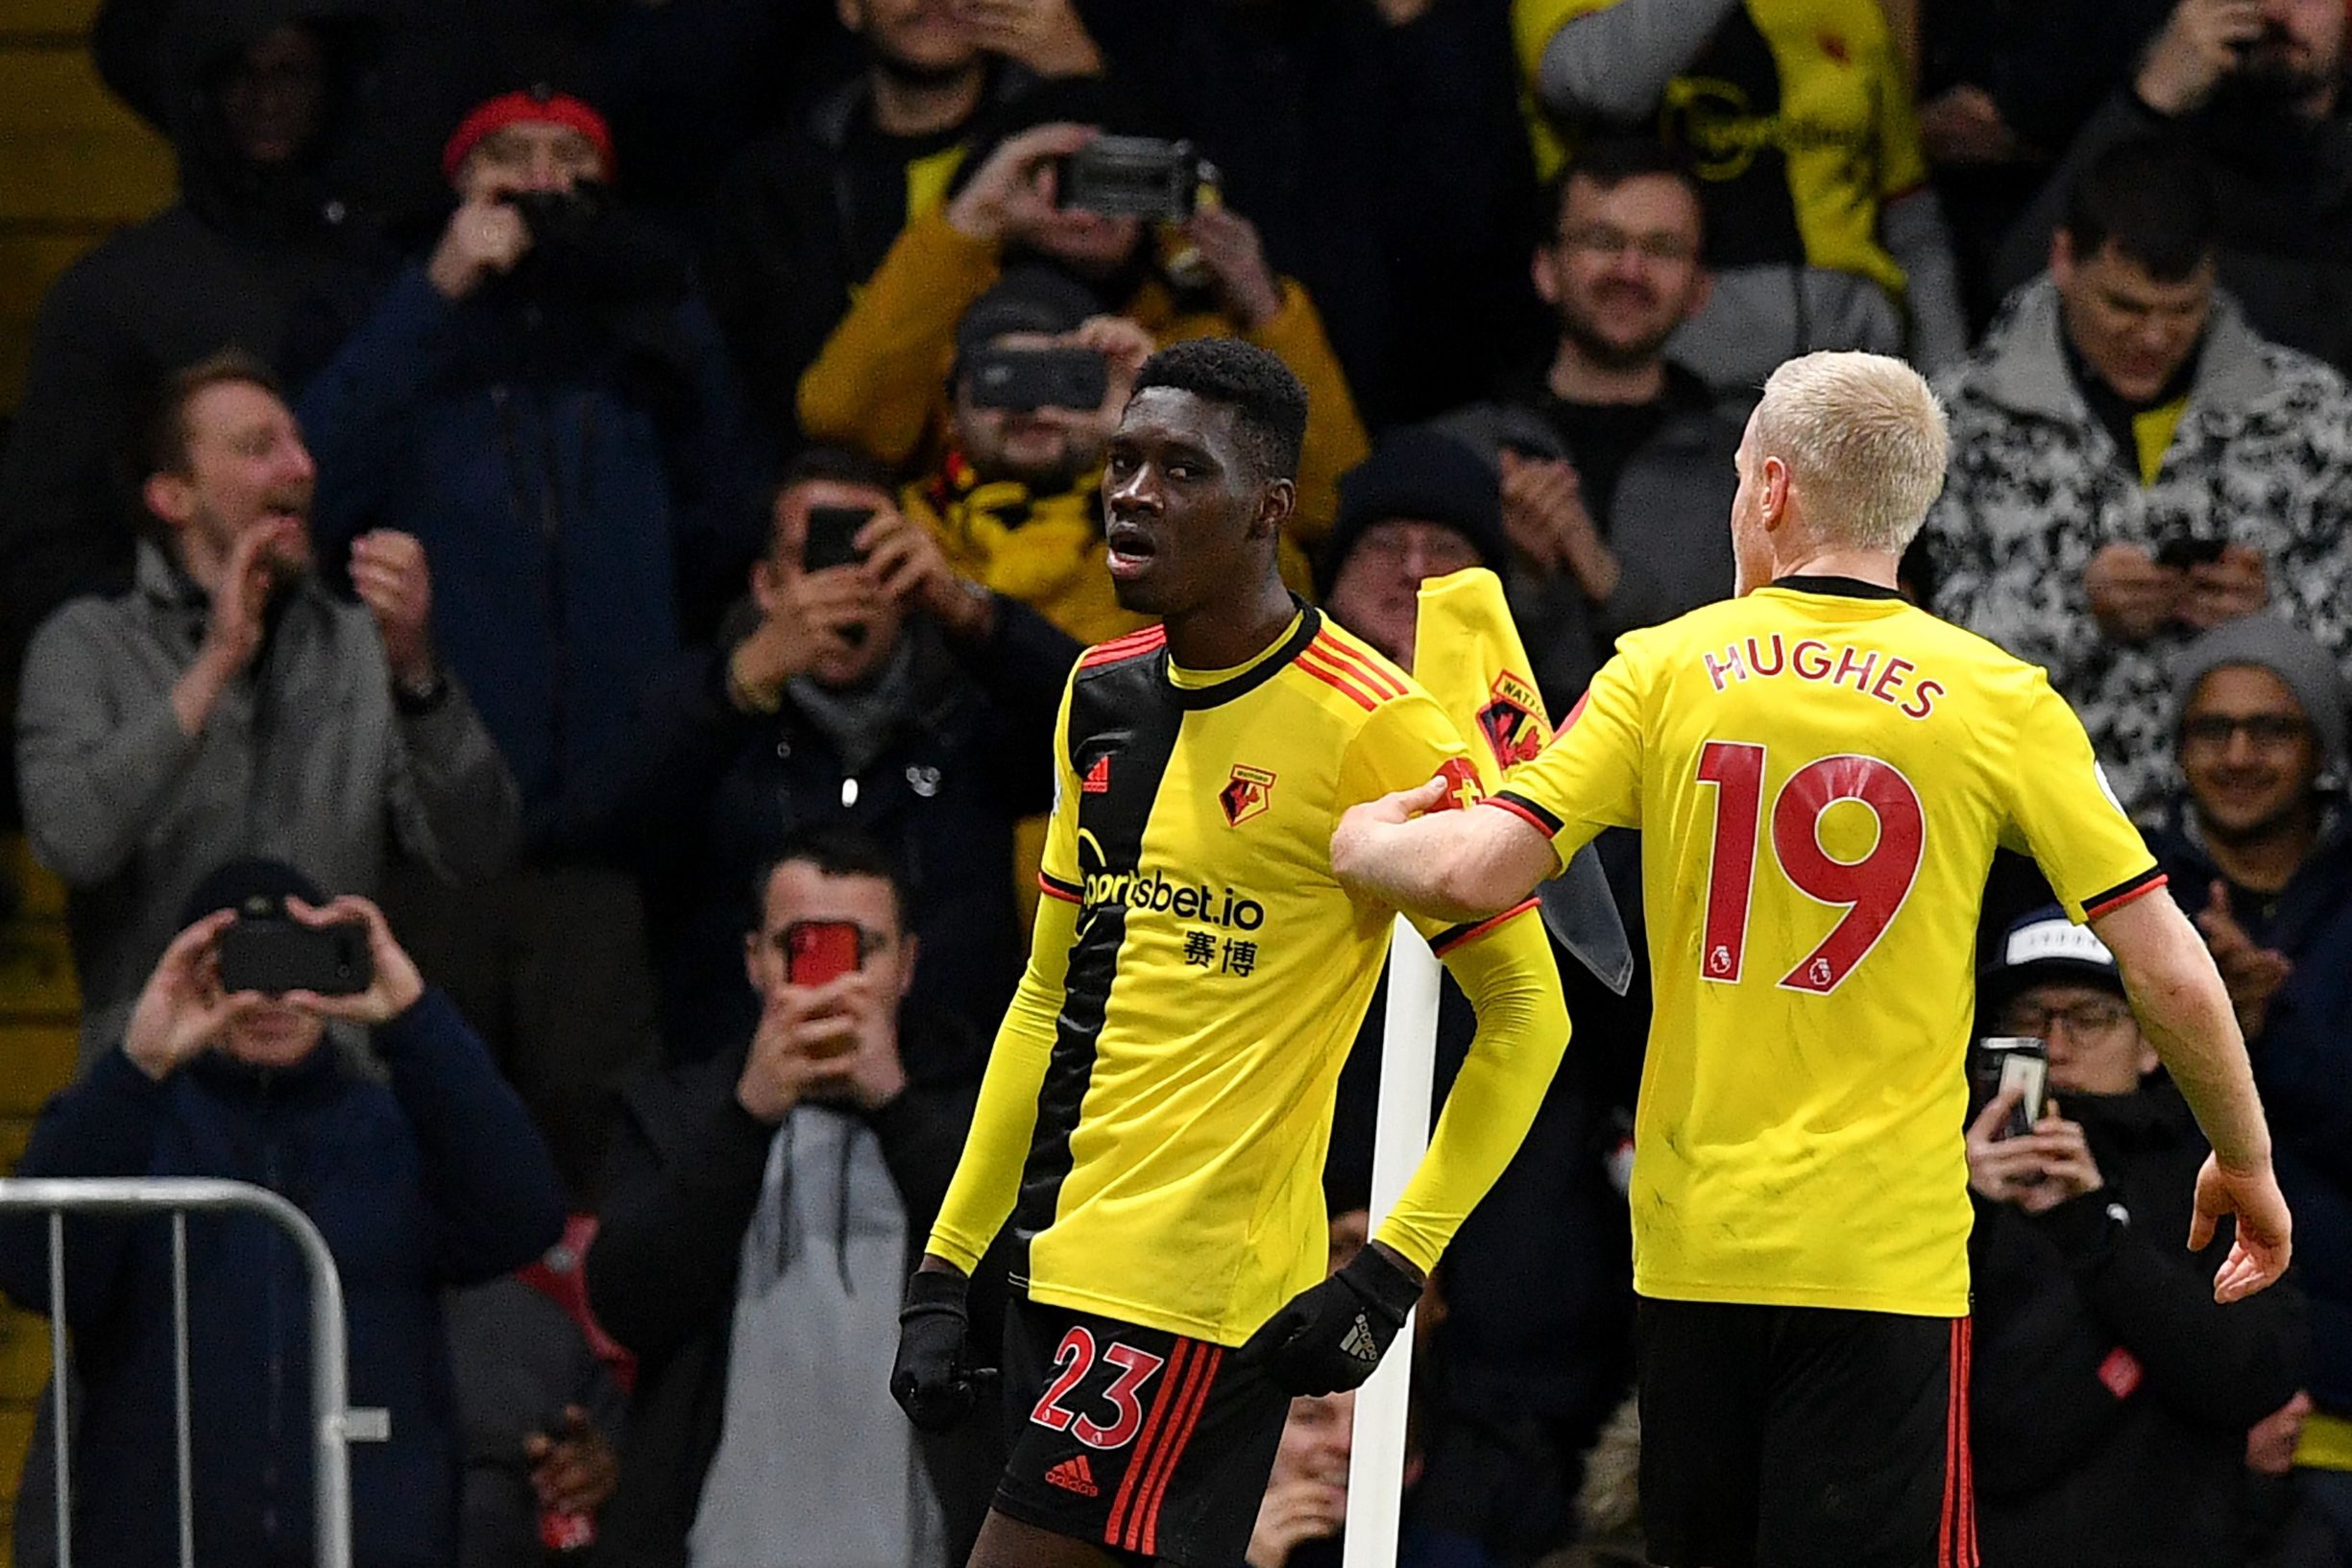 Watford's Senegalese midfielder Ismaila Sarr (L) celebrates with Watford's English midfielder Will Hughes after he scores his team's second goal past Liverpool's Brazilian goalkeeper Alisson Becker during the English Premier League football match between Watford and Liverpool at Vicarage Road Stadium in Watford, north of London on February 29, 2020. (Photo by Justin TALLIS / AFP) / RESTRICTED TO EDITORIAL USE. No use with unauthorized audio, video, data, fixture lists, club/league logos or 'live' services. Online in-match use limited to 120 images. An additional 40 images may be used in extra time. No video emulation. Social media in-match use limited to 120 images. An additional 40 images may be used in extra time. No use in betting publications, games or single club/league/player publications. / 